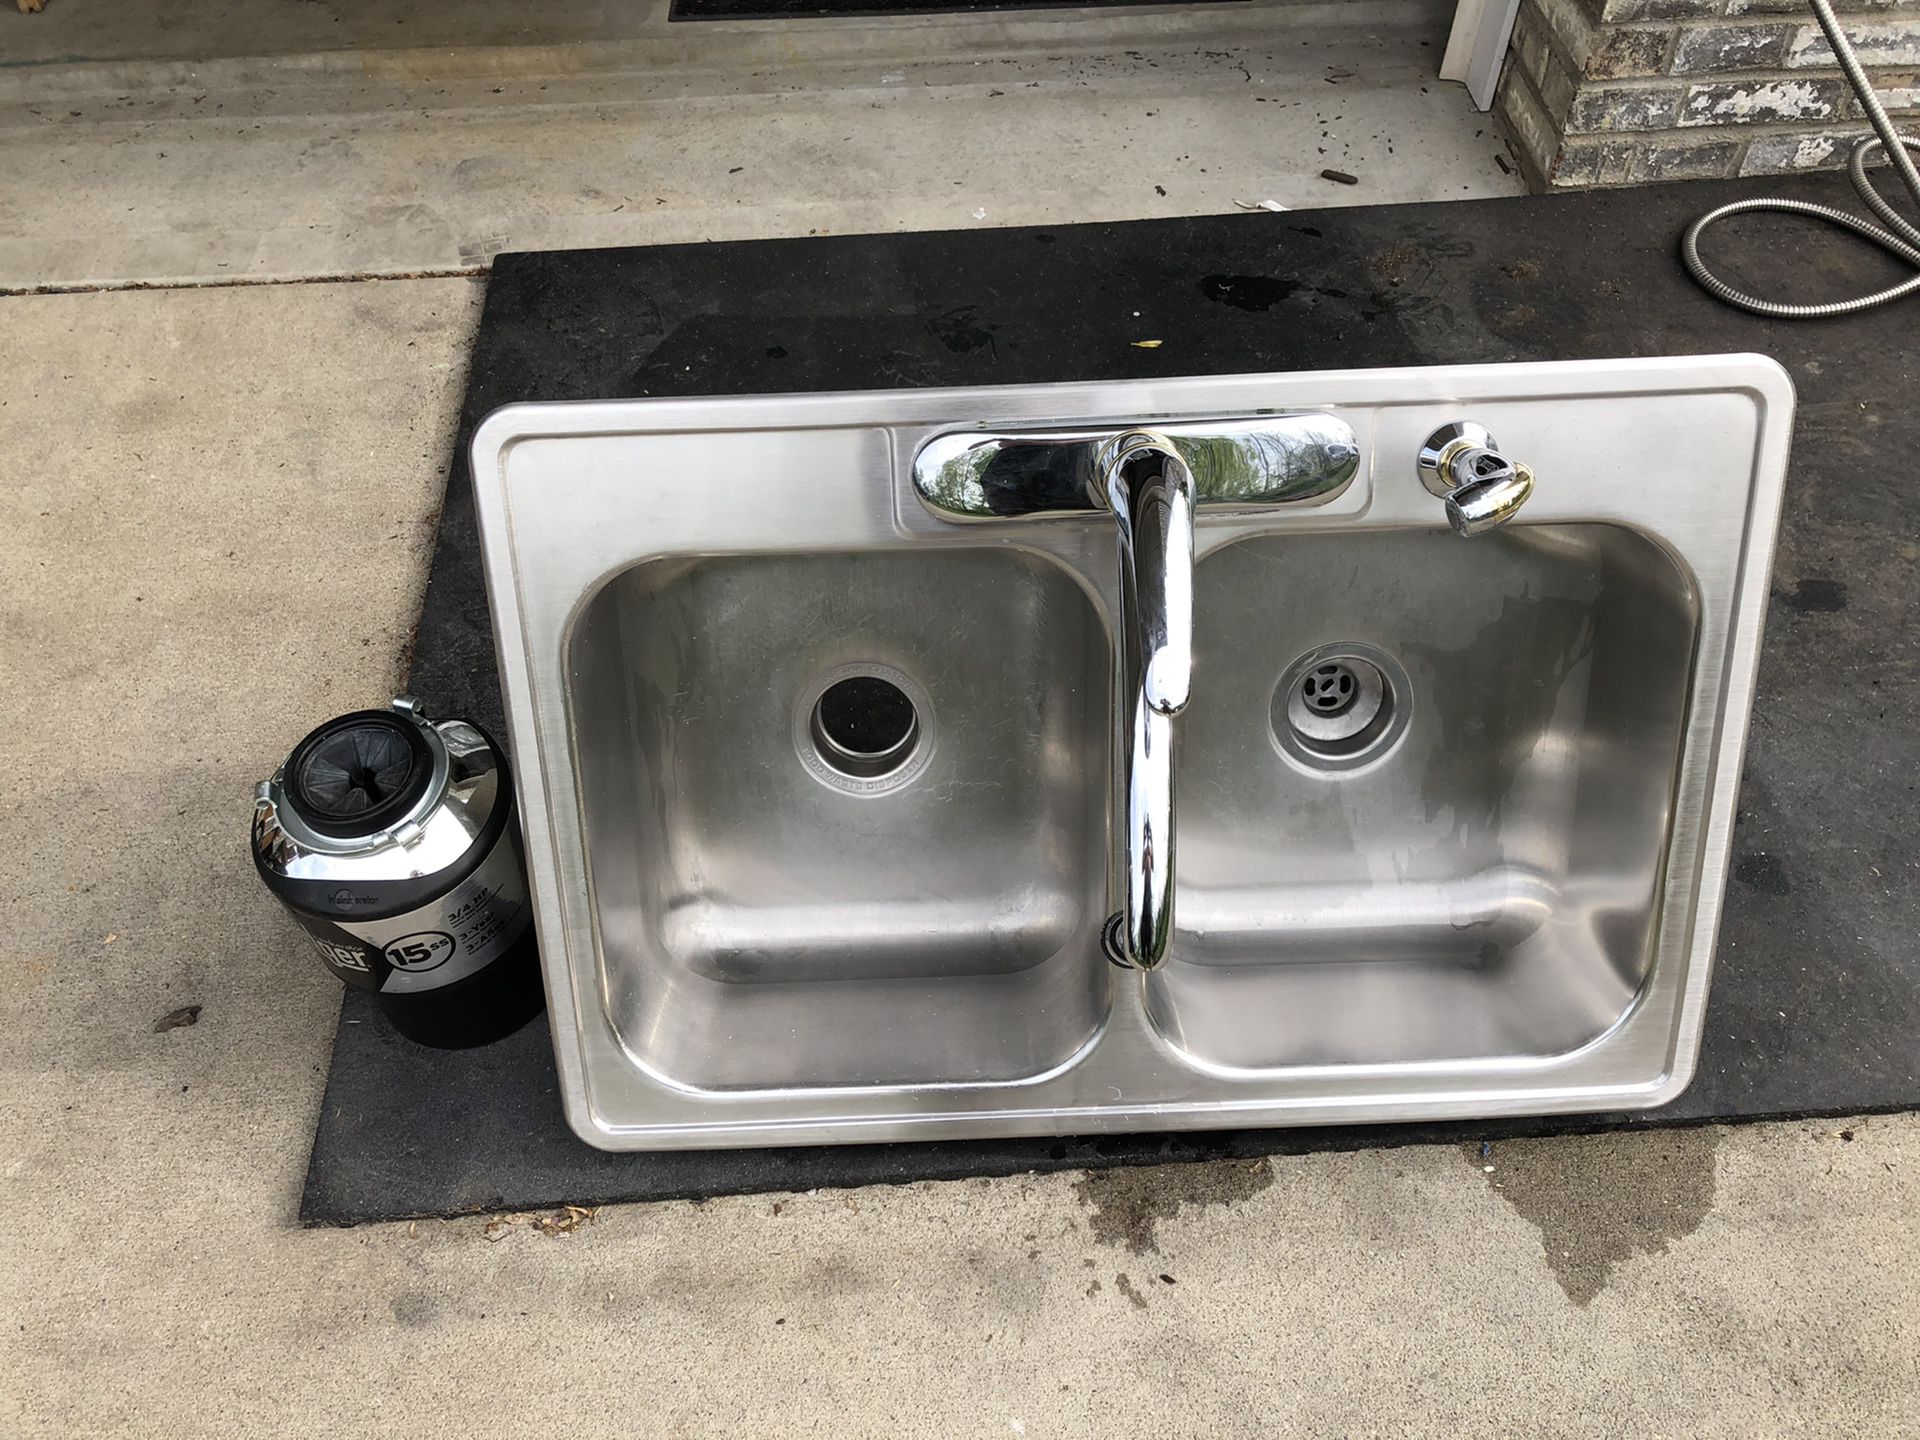 Stainless Steel Double Bowl Kitchen Sink with 3/4 HP Badger Garbage Disposal and Moen Faucet